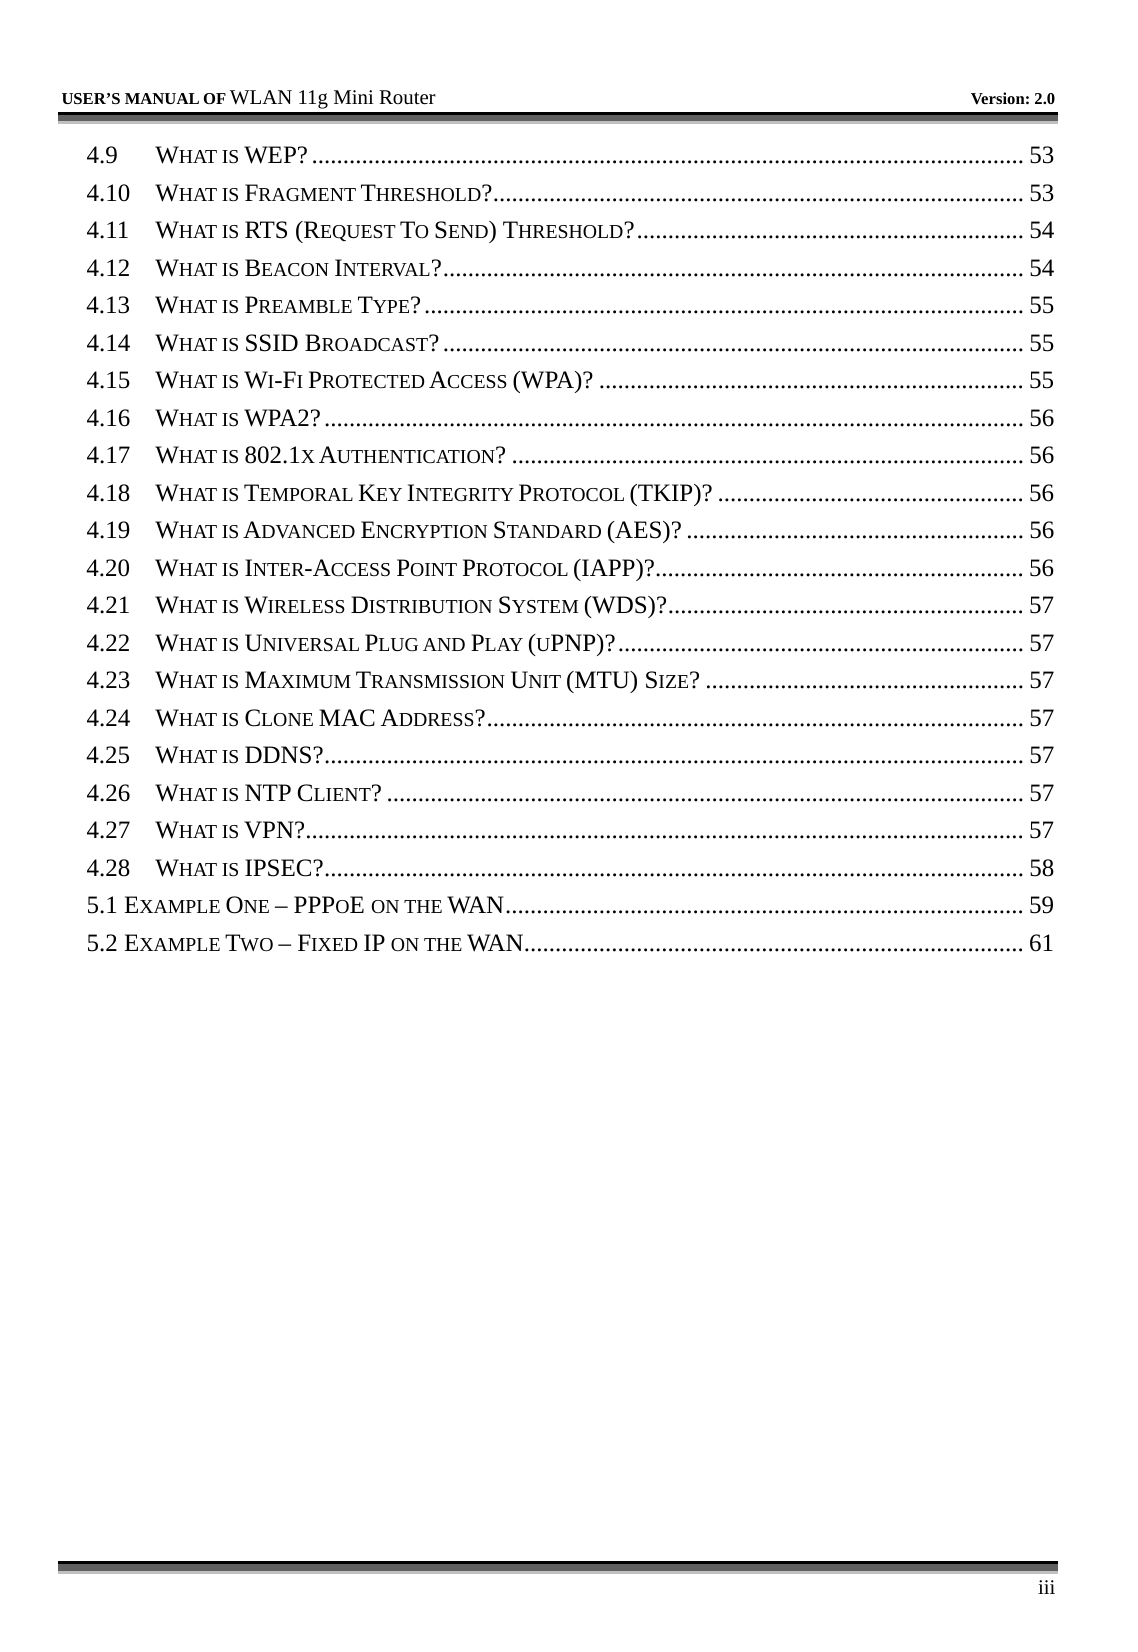   USER’S MANUAL OF WLAN 11g Mini Router   Version: 2.0     iii 4.9 WHAT IS WEP?.................................................................................................................. 53 4.10 WHAT IS FRAGMENT THRESHOLD?..................................................................................... 53 4.11 WHAT IS RTS (REQUEST TO SEND) THRESHOLD?.............................................................. 54 4.12 WHAT IS BEACON INTERVAL?............................................................................................. 54 4.13 WHAT IS PREAMBLE TYPE?................................................................................................ 55 4.14 WHAT IS SSID BROADCAST?............................................................................................. 55 4.15 WHAT IS WI-FI PROTECTED ACCESS (WPA)? .................................................................... 55 4.16 WHAT IS WPA2?................................................................................................................ 56 4.17 WHAT IS 802.1X AUTHENTICATION? .................................................................................. 56 4.18 WHAT IS TEMPORAL KEY INTEGRITY PROTOCOL (TKIP)? ................................................. 56 4.19 WHAT IS ADVANCED ENCRYPTION STANDARD (AES)? ...................................................... 56 4.20 WHAT IS INTER-ACCESS POINT PROTOCOL (IAPP)?........................................................... 56 4.21 WHAT IS WIRELESS DISTRIBUTION SYSTEM (WDS)?......................................................... 57 4.22 WHAT IS UNIVERSAL PLUG AND PLAY (UPNP)?................................................................. 57 4.23 WHAT IS MAXIMUM TRANSMISSION UNIT (MTU) SIZE? ................................................... 57 4.24 WHAT IS CLONE MAC ADDRESS?...................................................................................... 57 4.25 WHAT IS DDNS?................................................................................................................ 57 4.26 WHAT IS NTP CLIENT? ...................................................................................................... 57 4.27 WHAT IS VPN?................................................................................................................... 57 4.28 WHAT IS IPSEC?................................................................................................................ 58 5.1 EXAMPLE ONE – PPPOE ON THE WAN................................................................................... 59 5.2 EXAMPLE TWO – FIXED IP ON THE WAN................................................................................ 61 